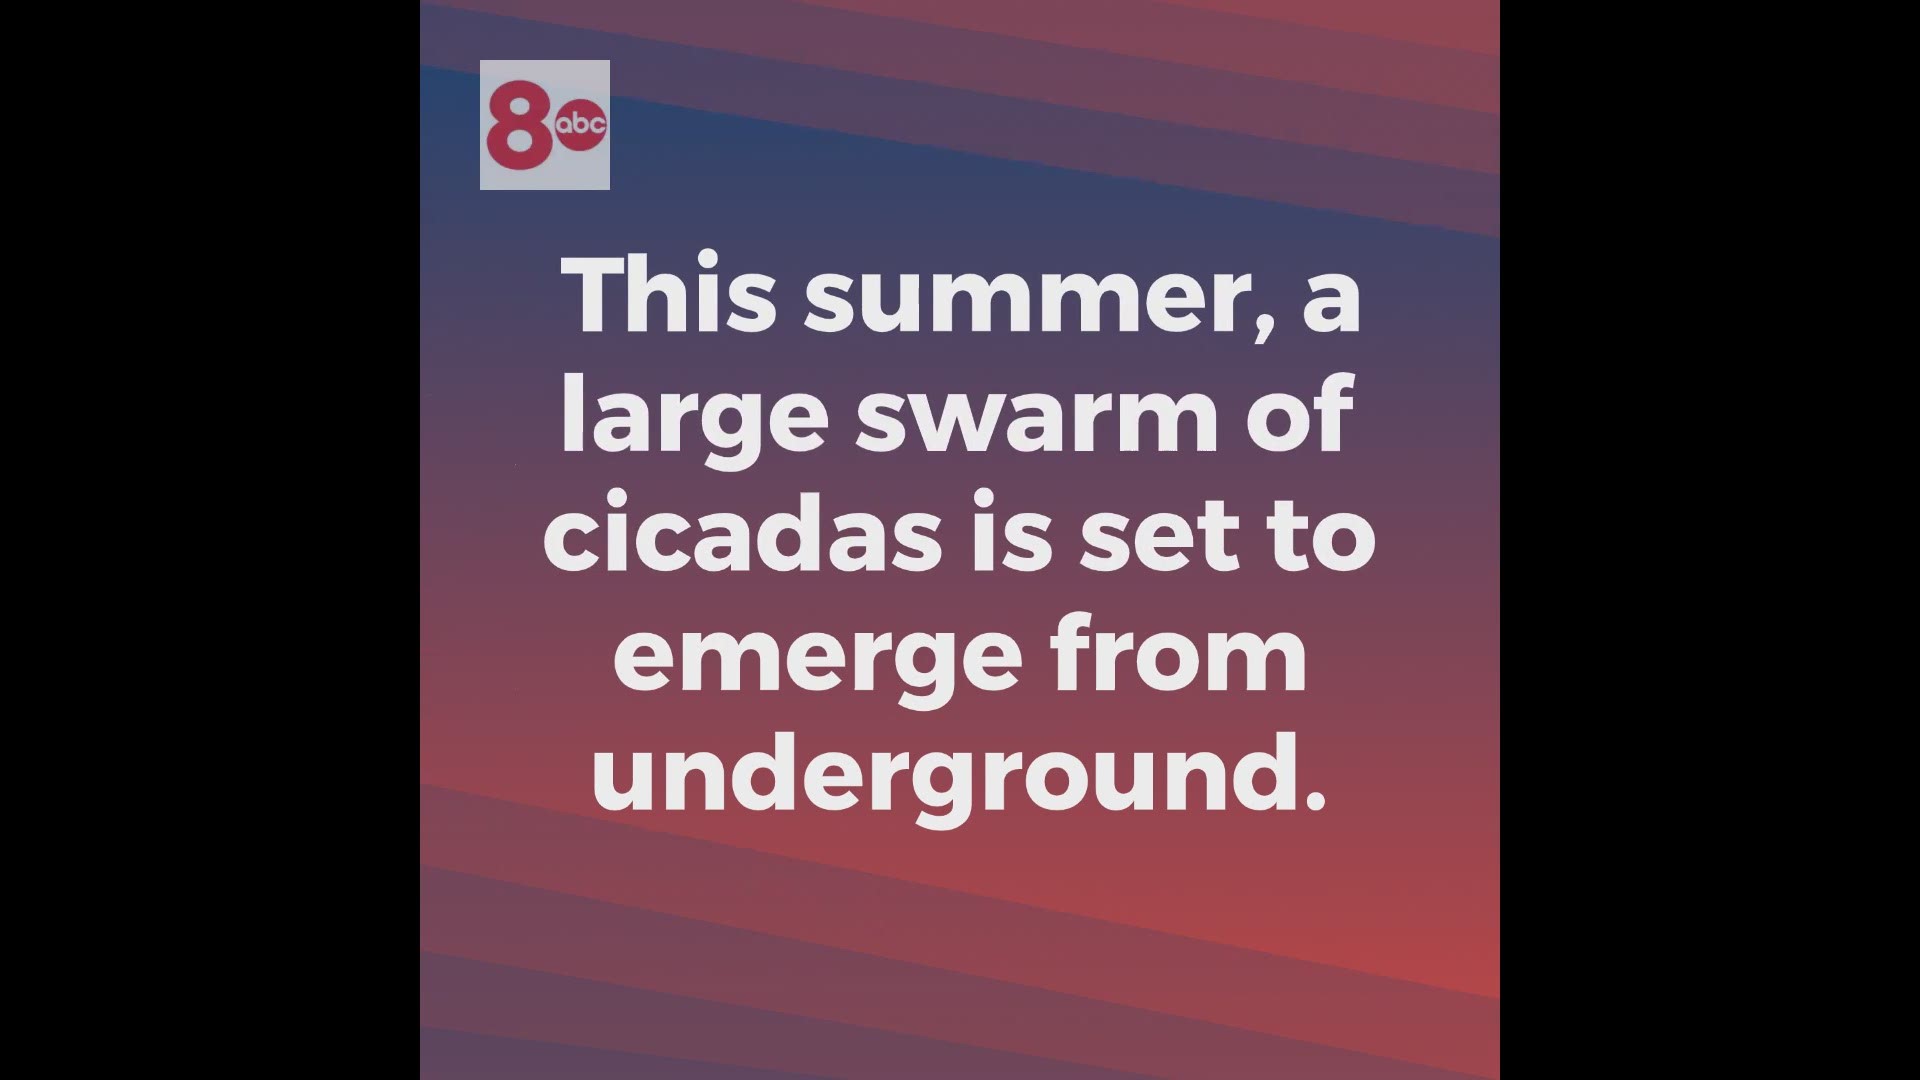 Poised to come up from the ground, a large swarm of Cicadas that have been underground for 17 years is expected this summer.